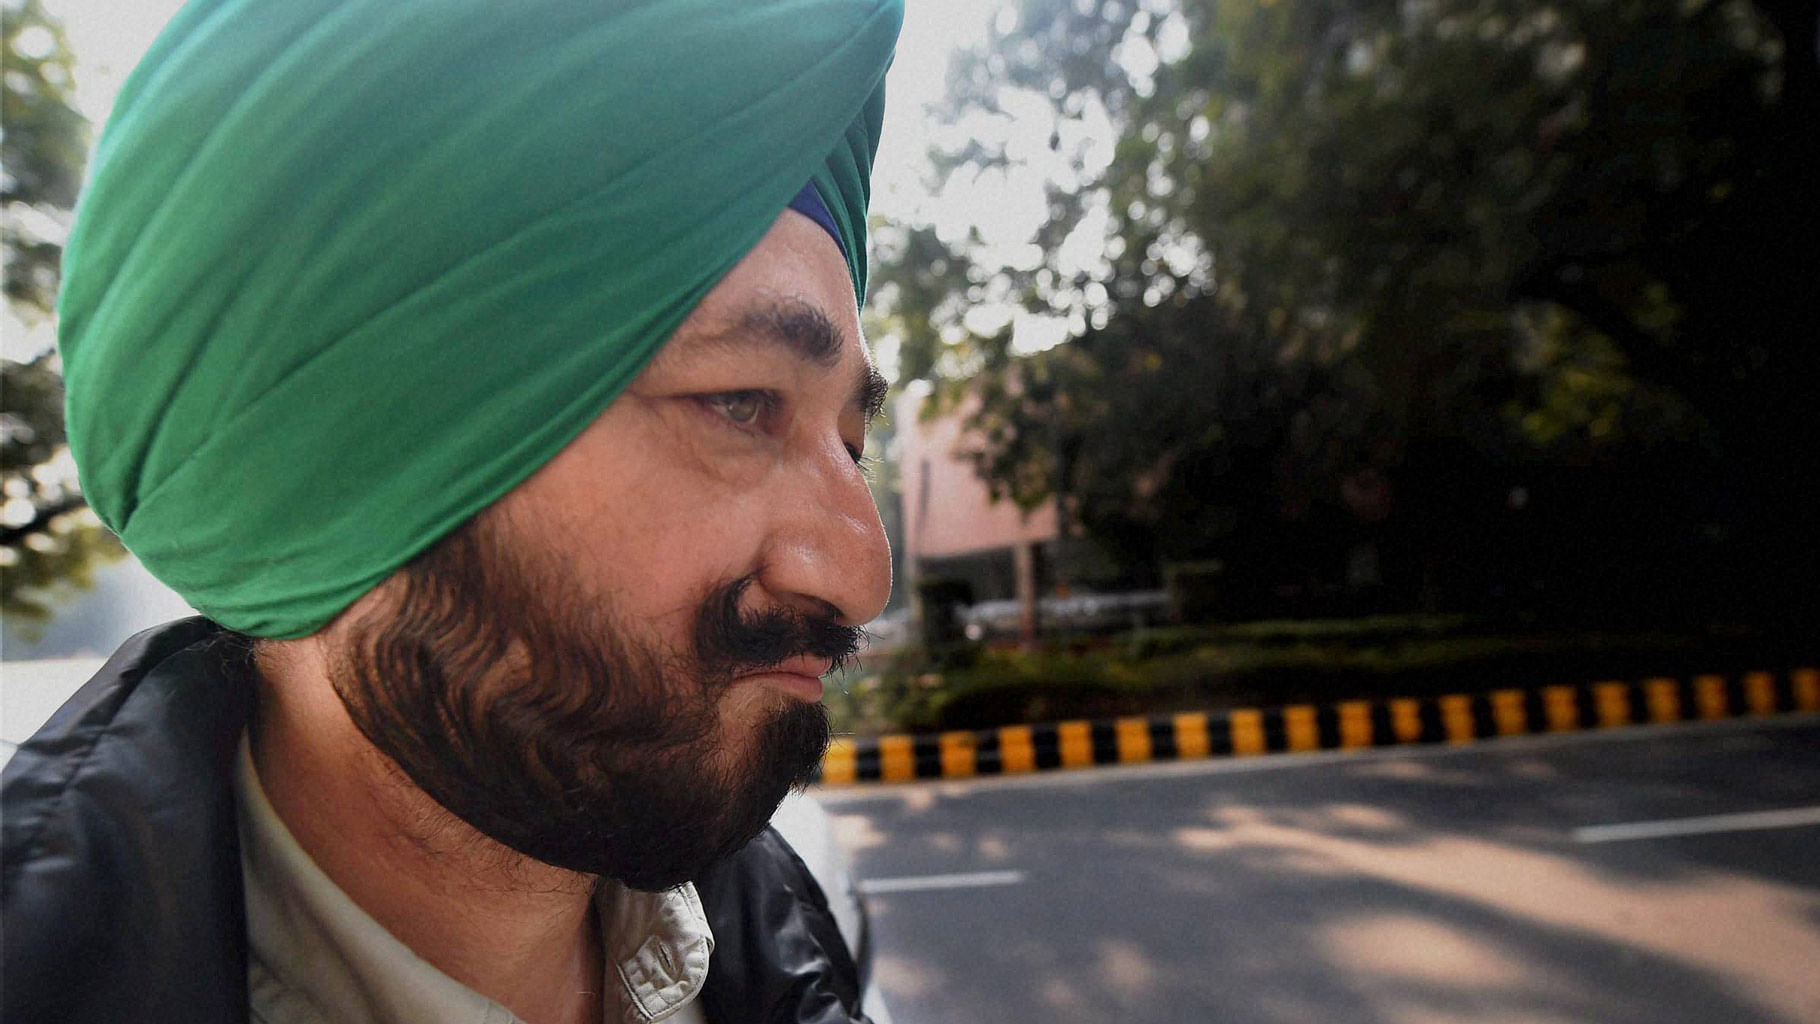 Gurdaspur SP Salwinder Singh, who was allegedly abducted by terrorists involved in the Pathankot attack, arrives in New Delhi on Tuesday for questioning. (Photo: PTI)